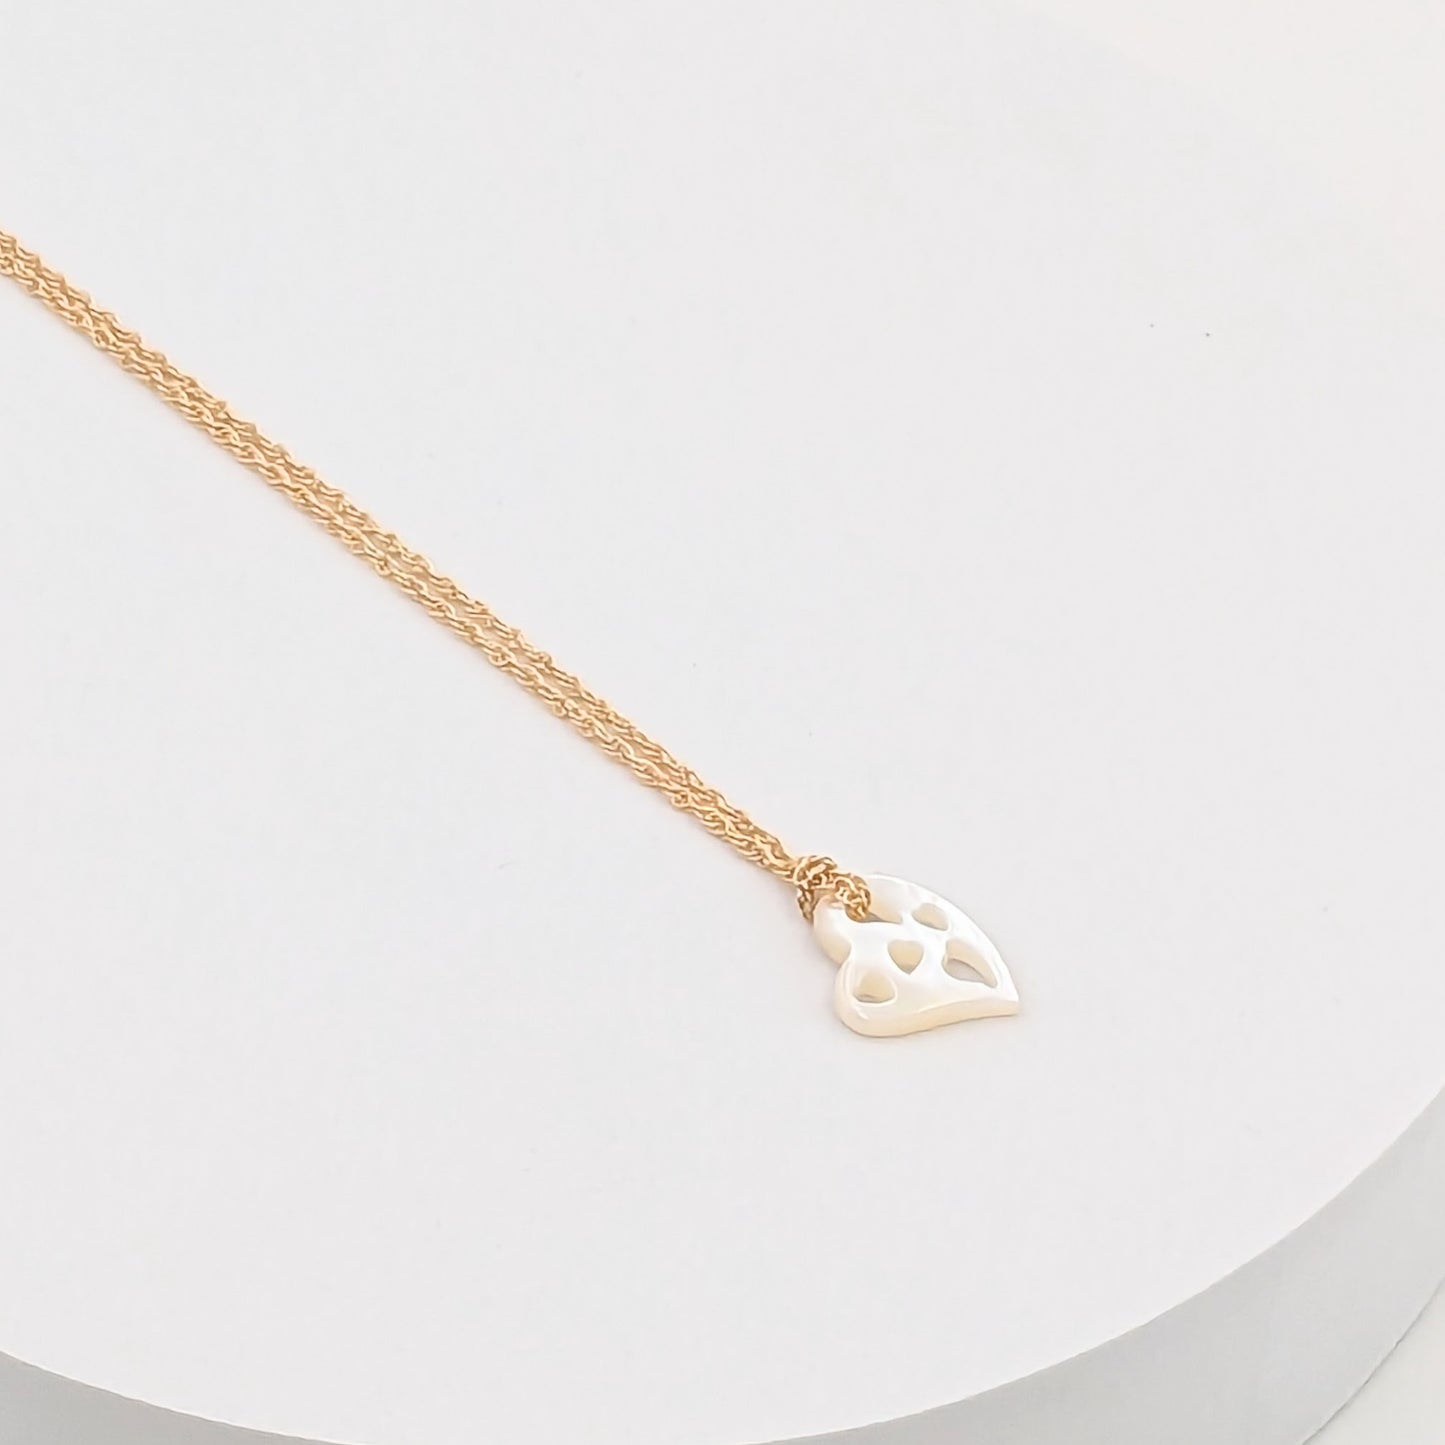 Full of Hearts Necklace